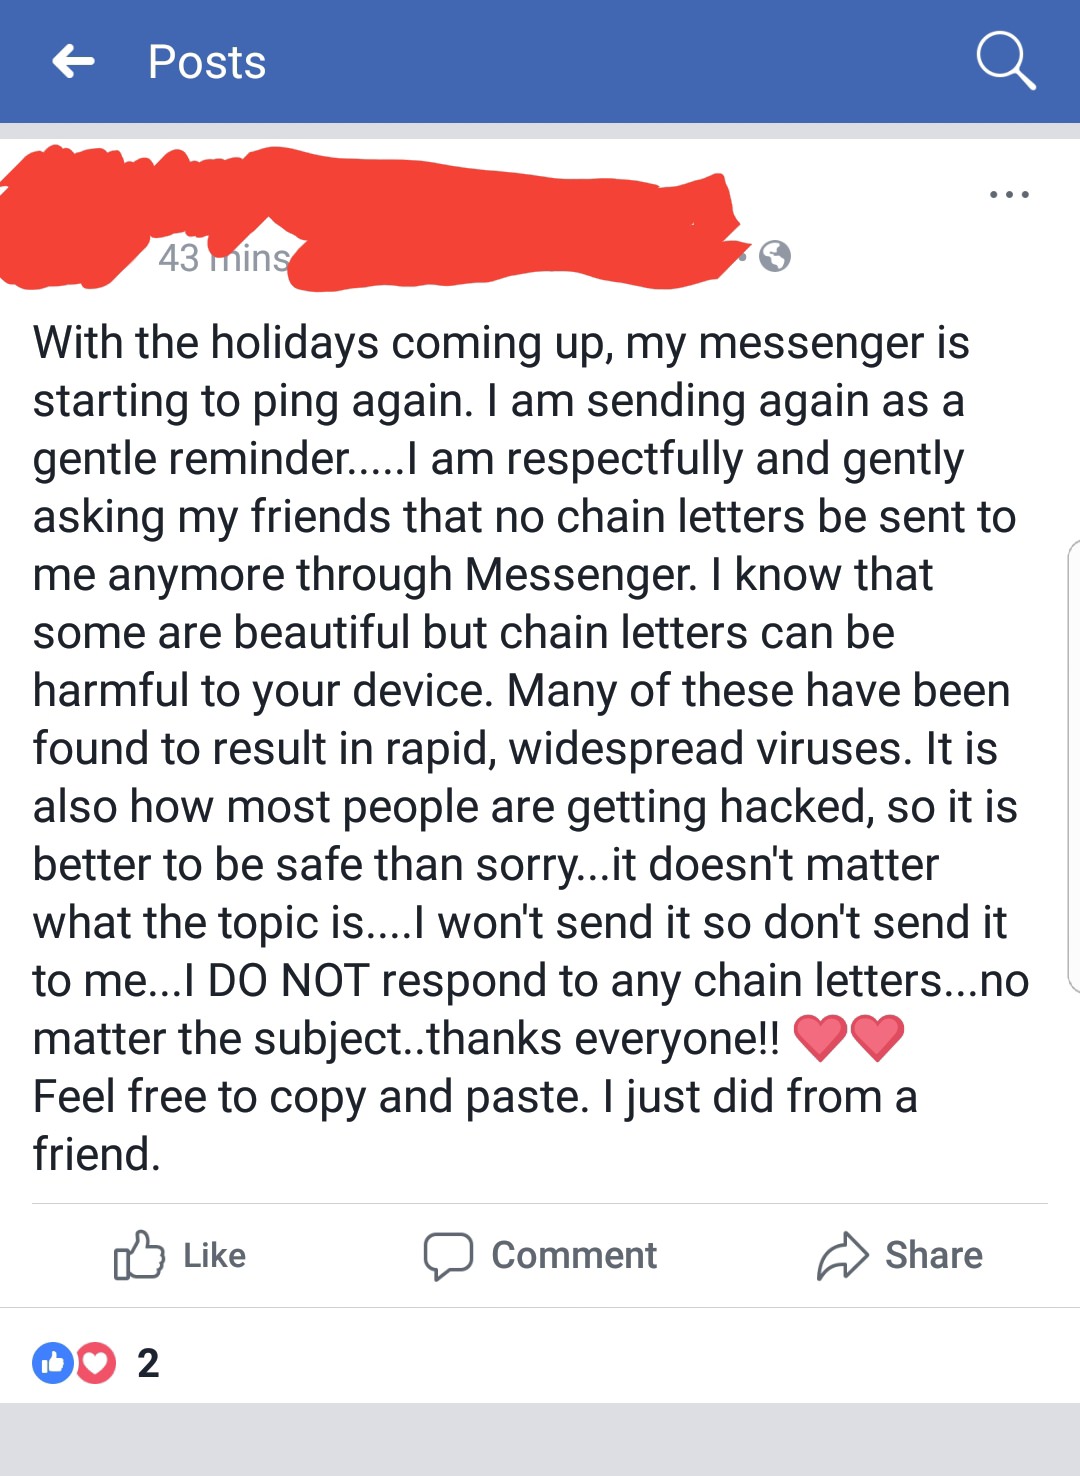 screenshot - 6 Posts 43 mins With the holidays coming up, my messenger is starting to ping again. I am sending again as a gentle reminder.....I am respectfully and gently asking my friends that no chain letters be sent to me anymore through Messenger. I k